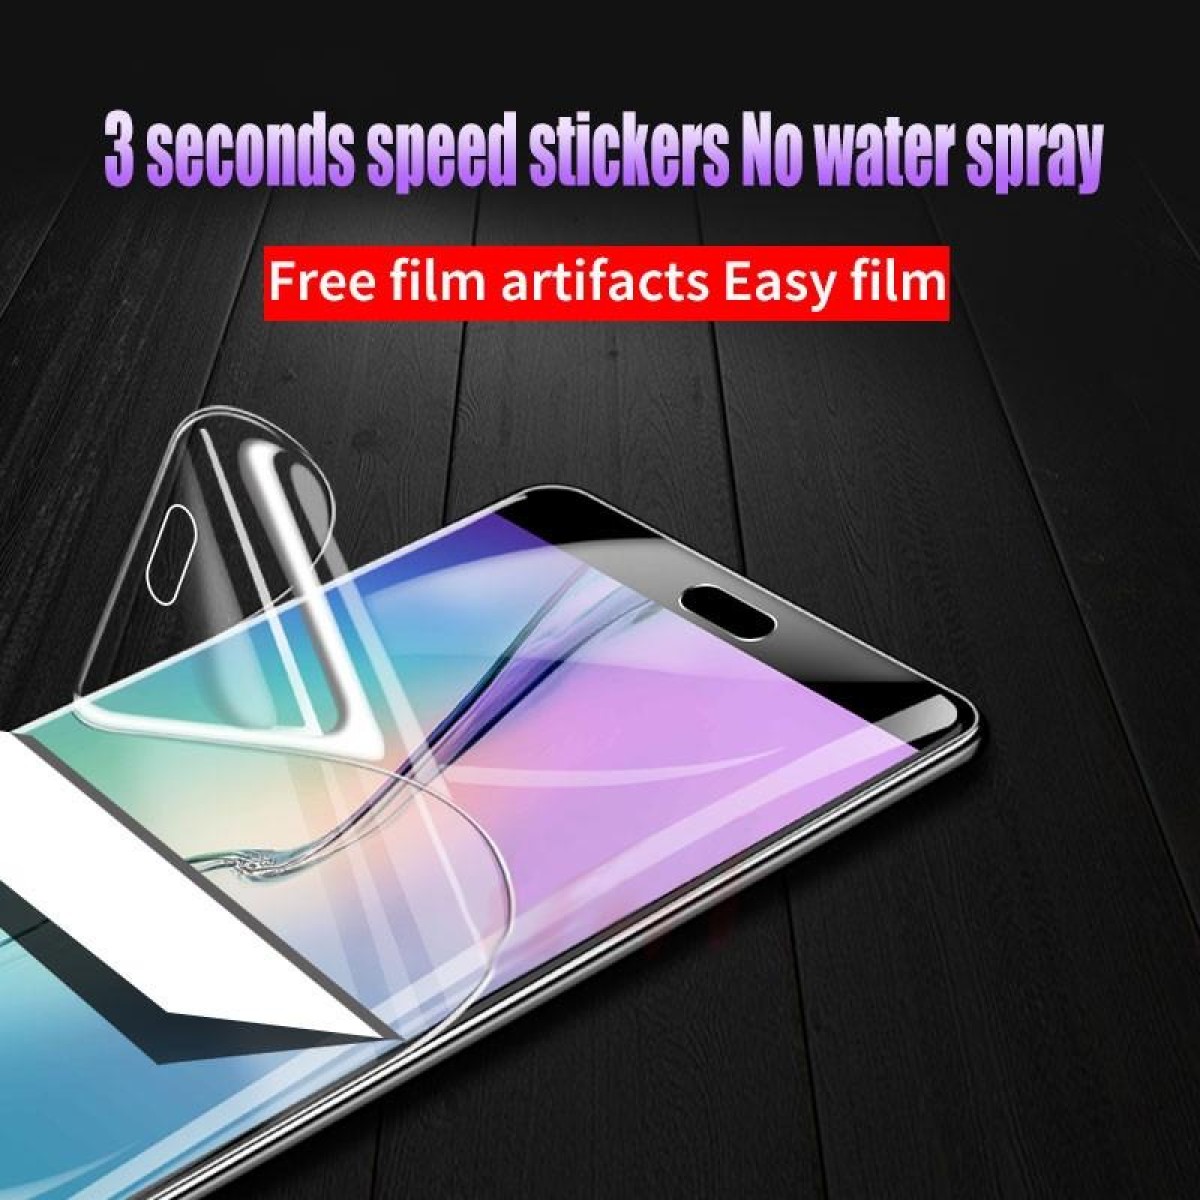 25 PCS Soft Hydrogel Film Full Cover Front Protector with Alcohol Cotton + Scratch Card for OnePlus 7